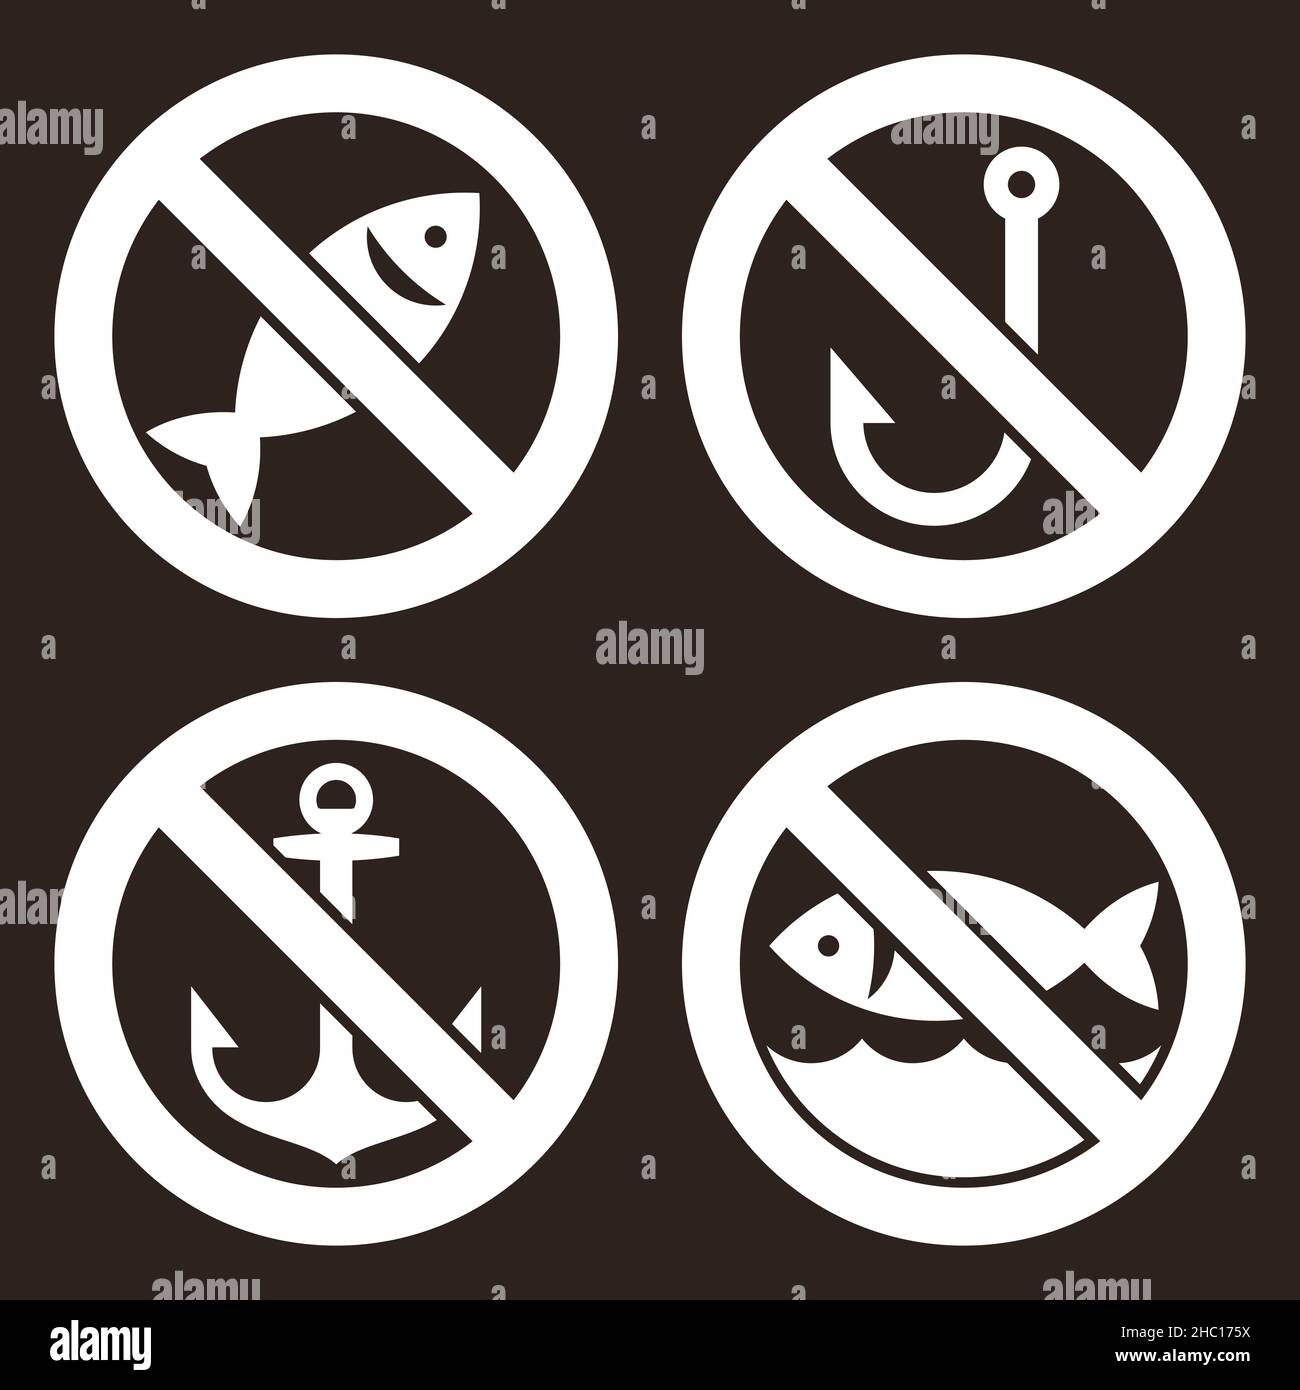 No fishing allowed and no anchoring signs on dark background Stock Photo